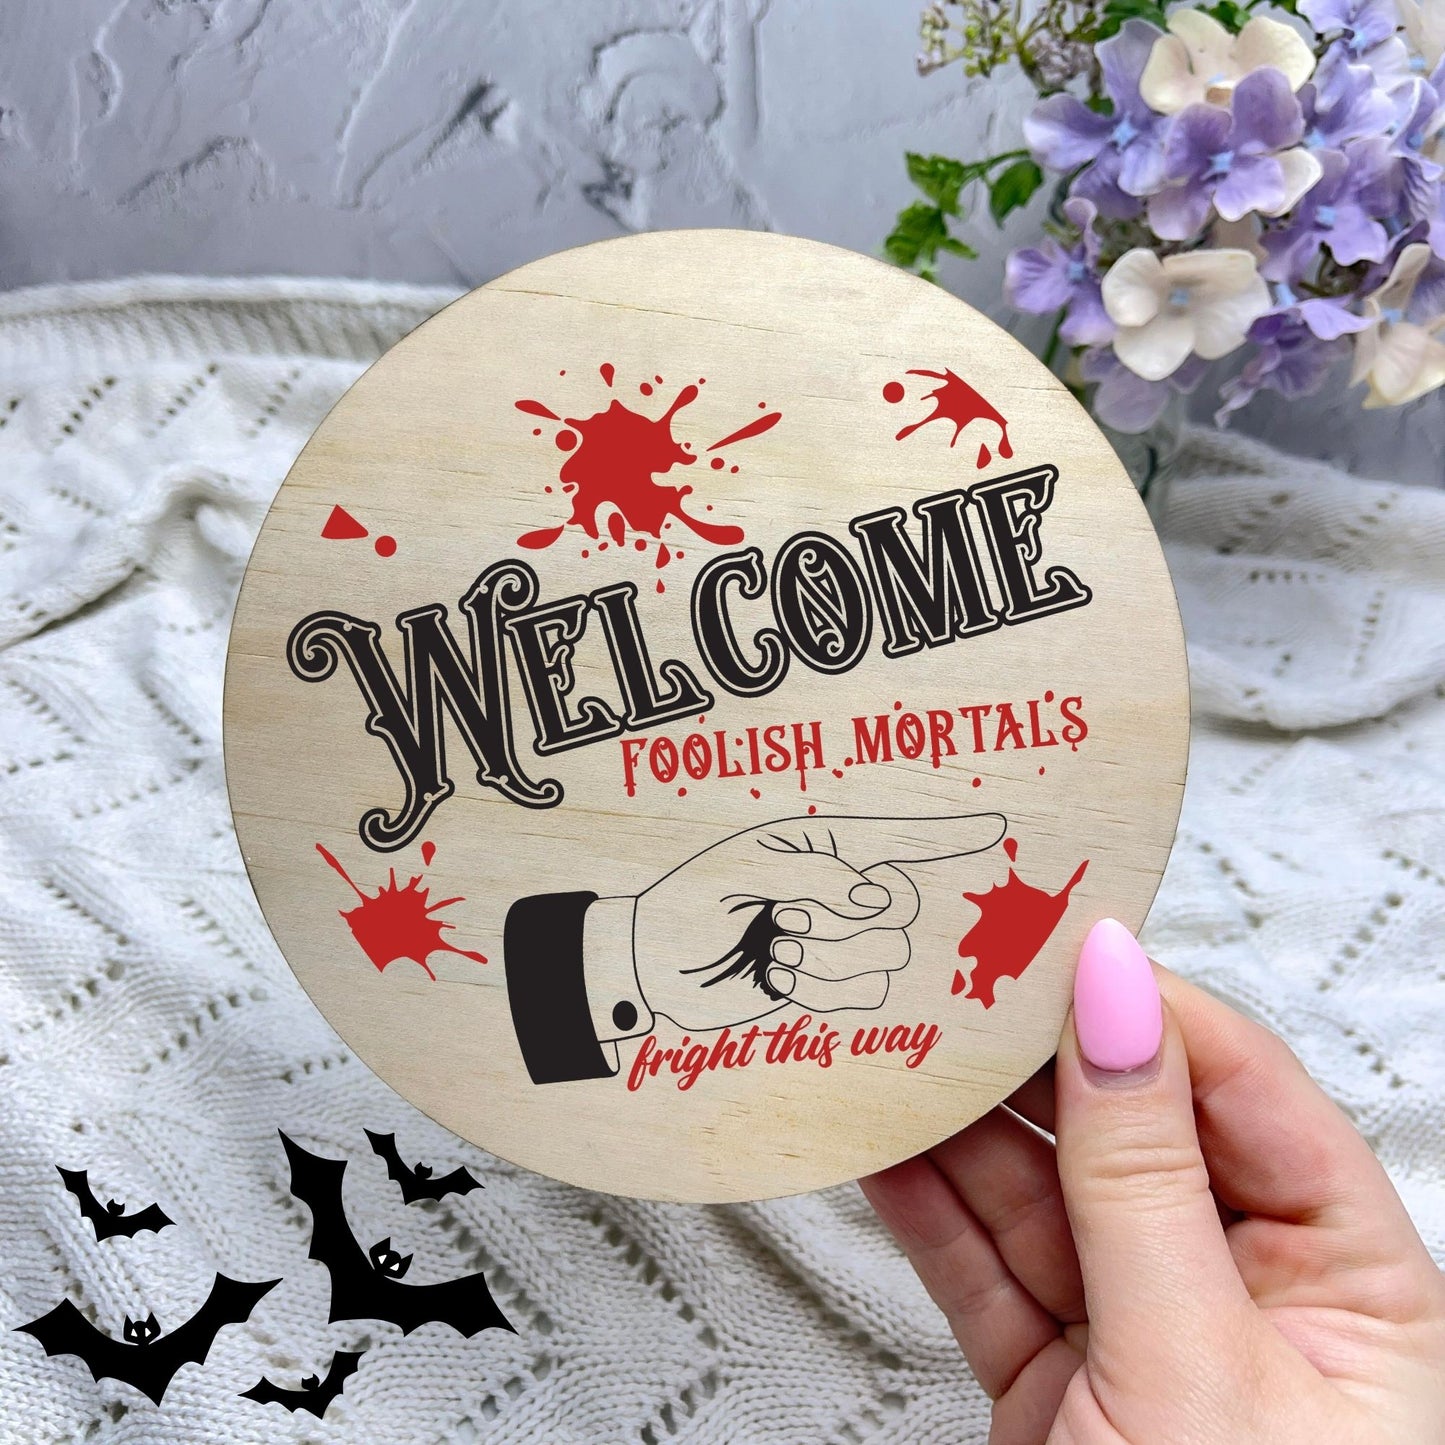 Welcome Foolish Mortals sign, Halloween Decor, Spooky Vibes, hocus pocus sign, trick or treat decor, haunted house h51